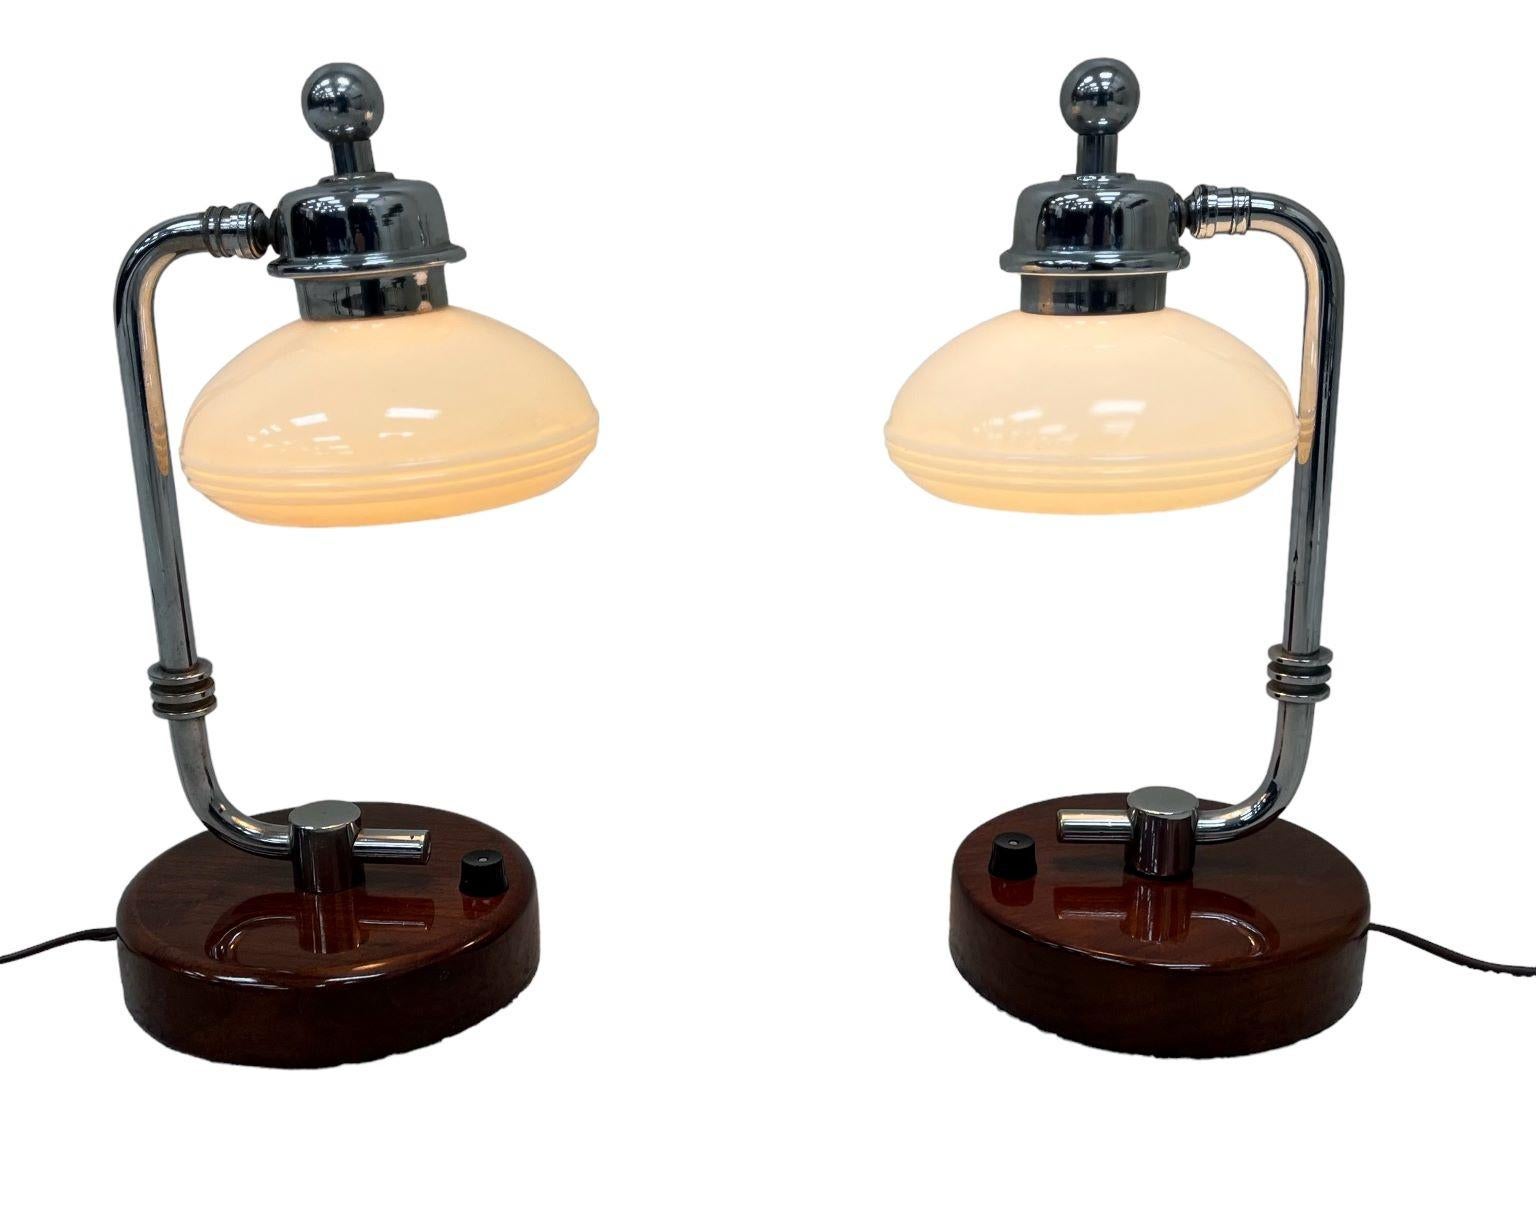 Rare pair of Machine Age Art Deco walnut and polished chrome table lamps. A simple streamline design from the American Art deco movement of the 1930’s. Professionally restored and rewired. Dimensions 13 inches high, base is 6 inches in diameter, and